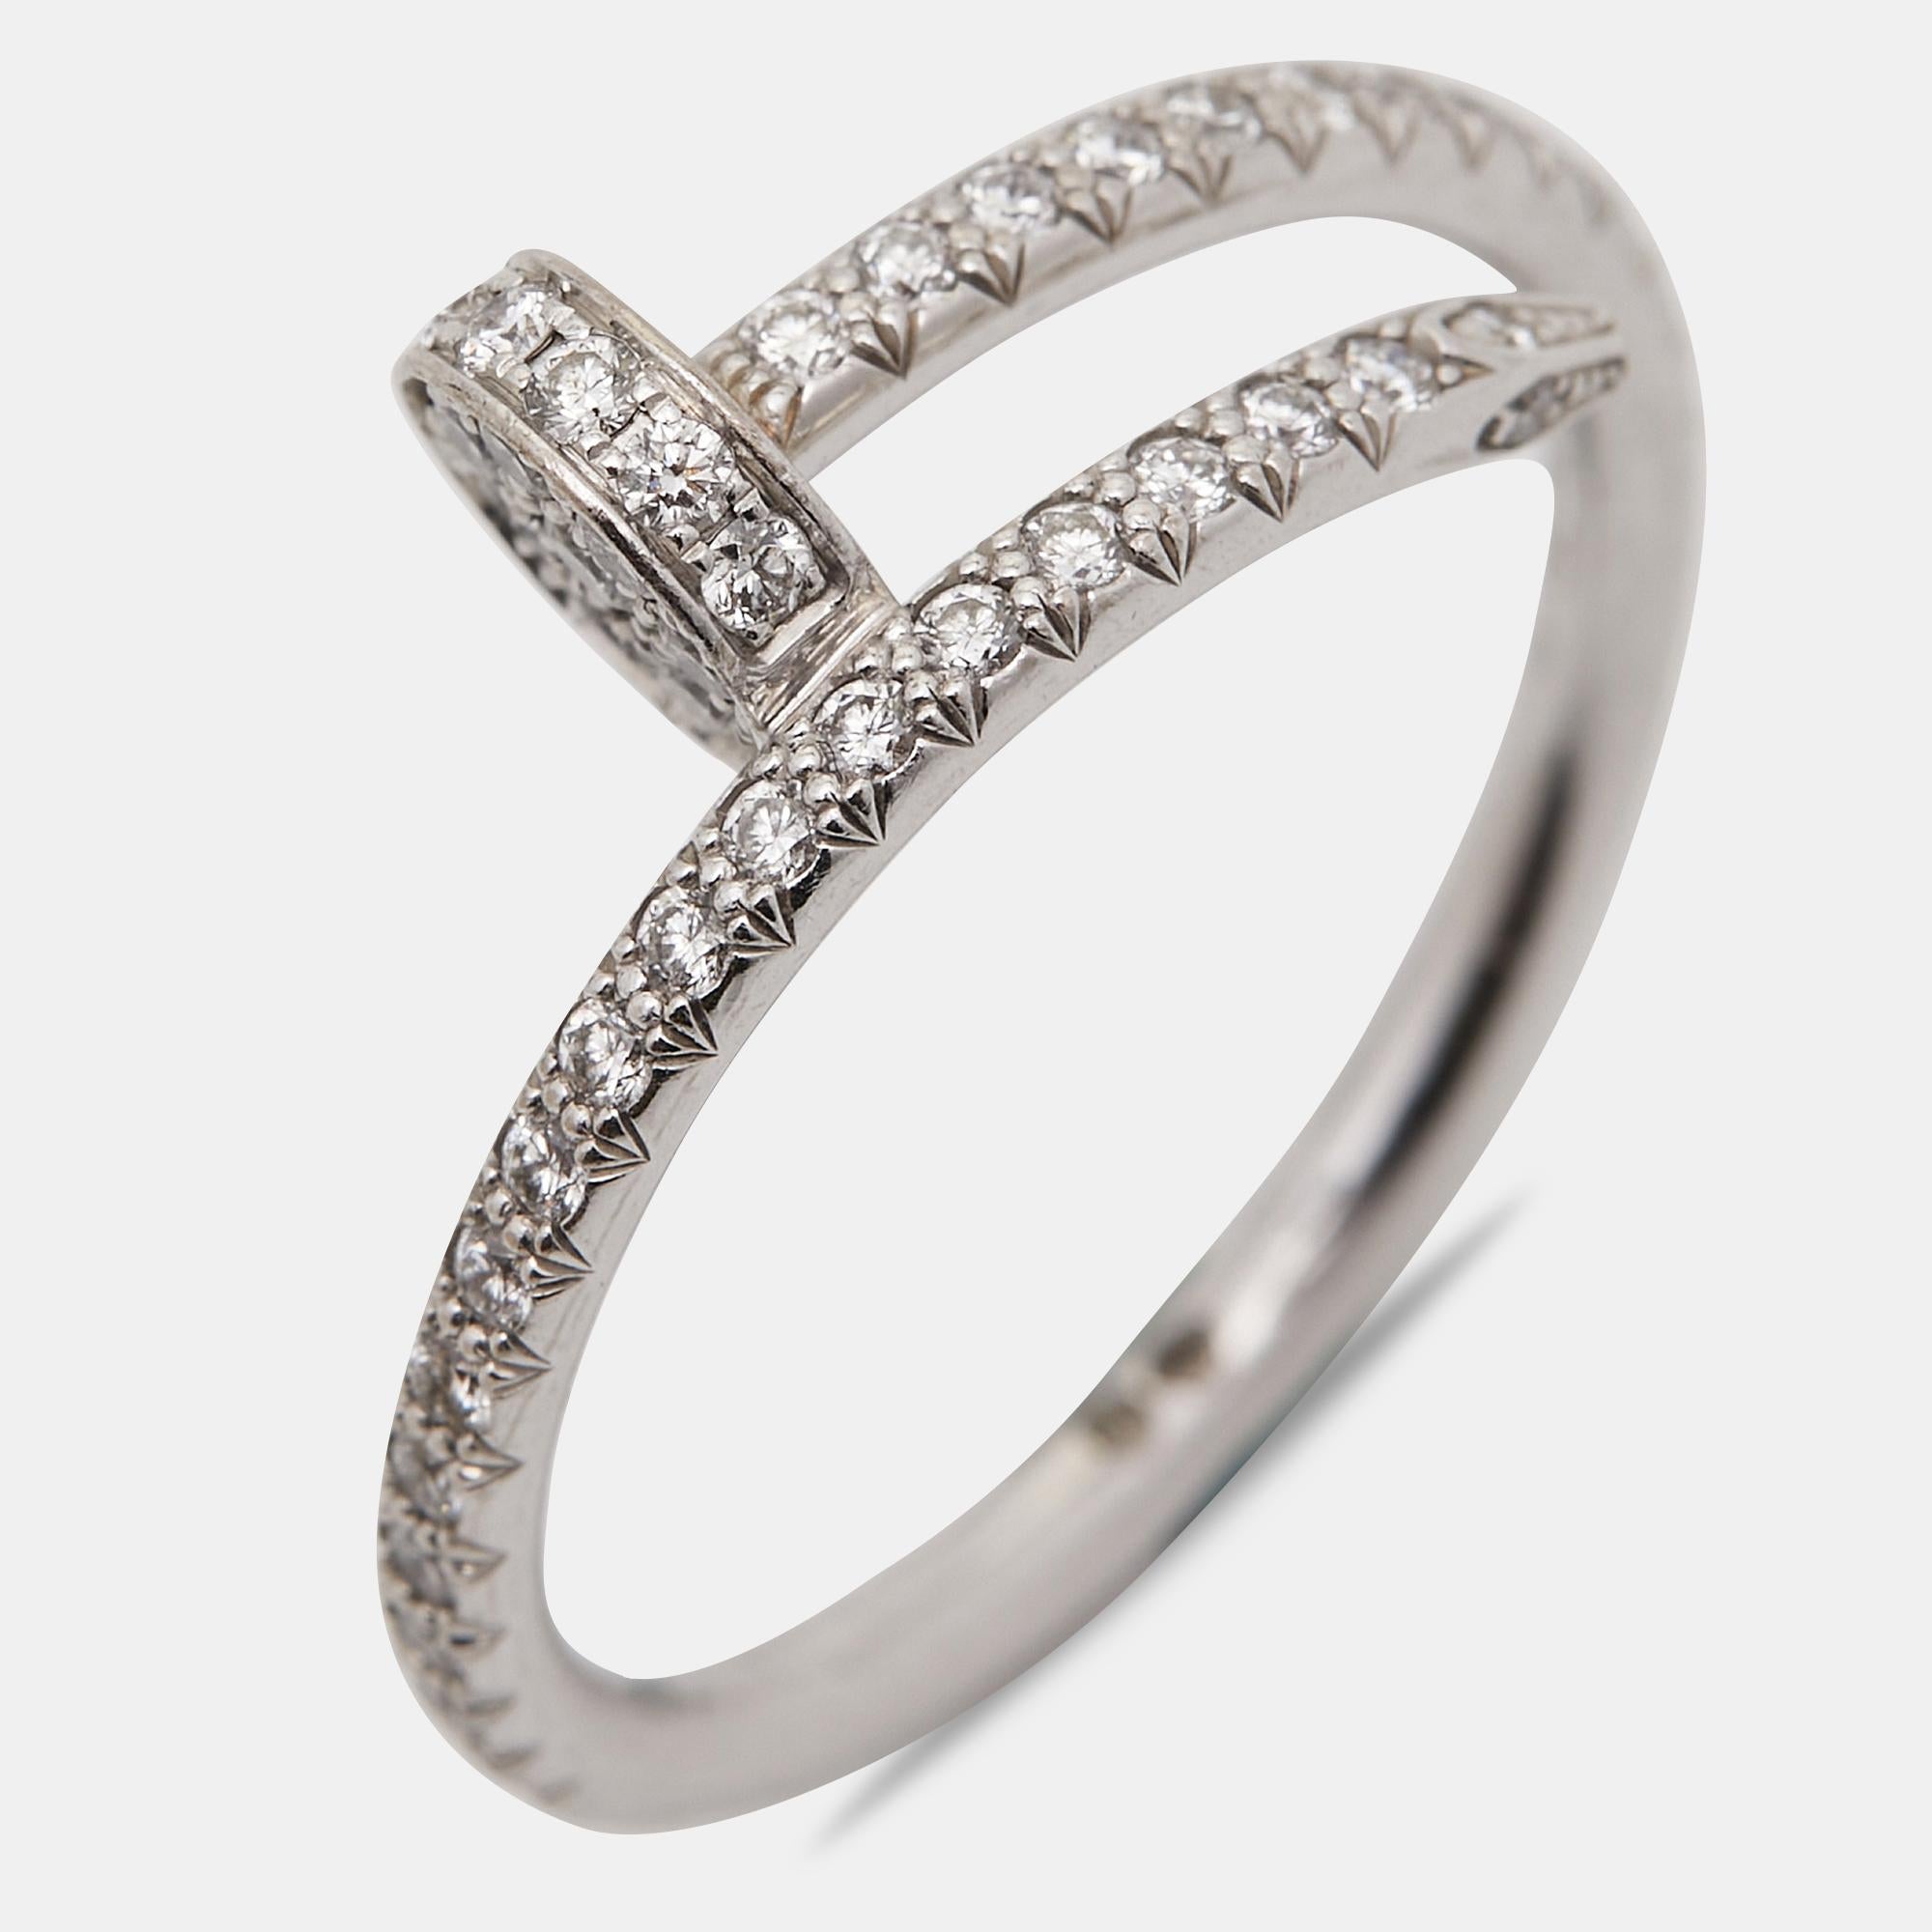 Crafted by Cartier, the Juste Un Clou ring exudes elegance and refinement. Its sleek design seamlessly merges modernity with luxury, featuring dazzling diamonds set in lustrous 18k white gold. A testament to timeless beauty, this ring elevates any